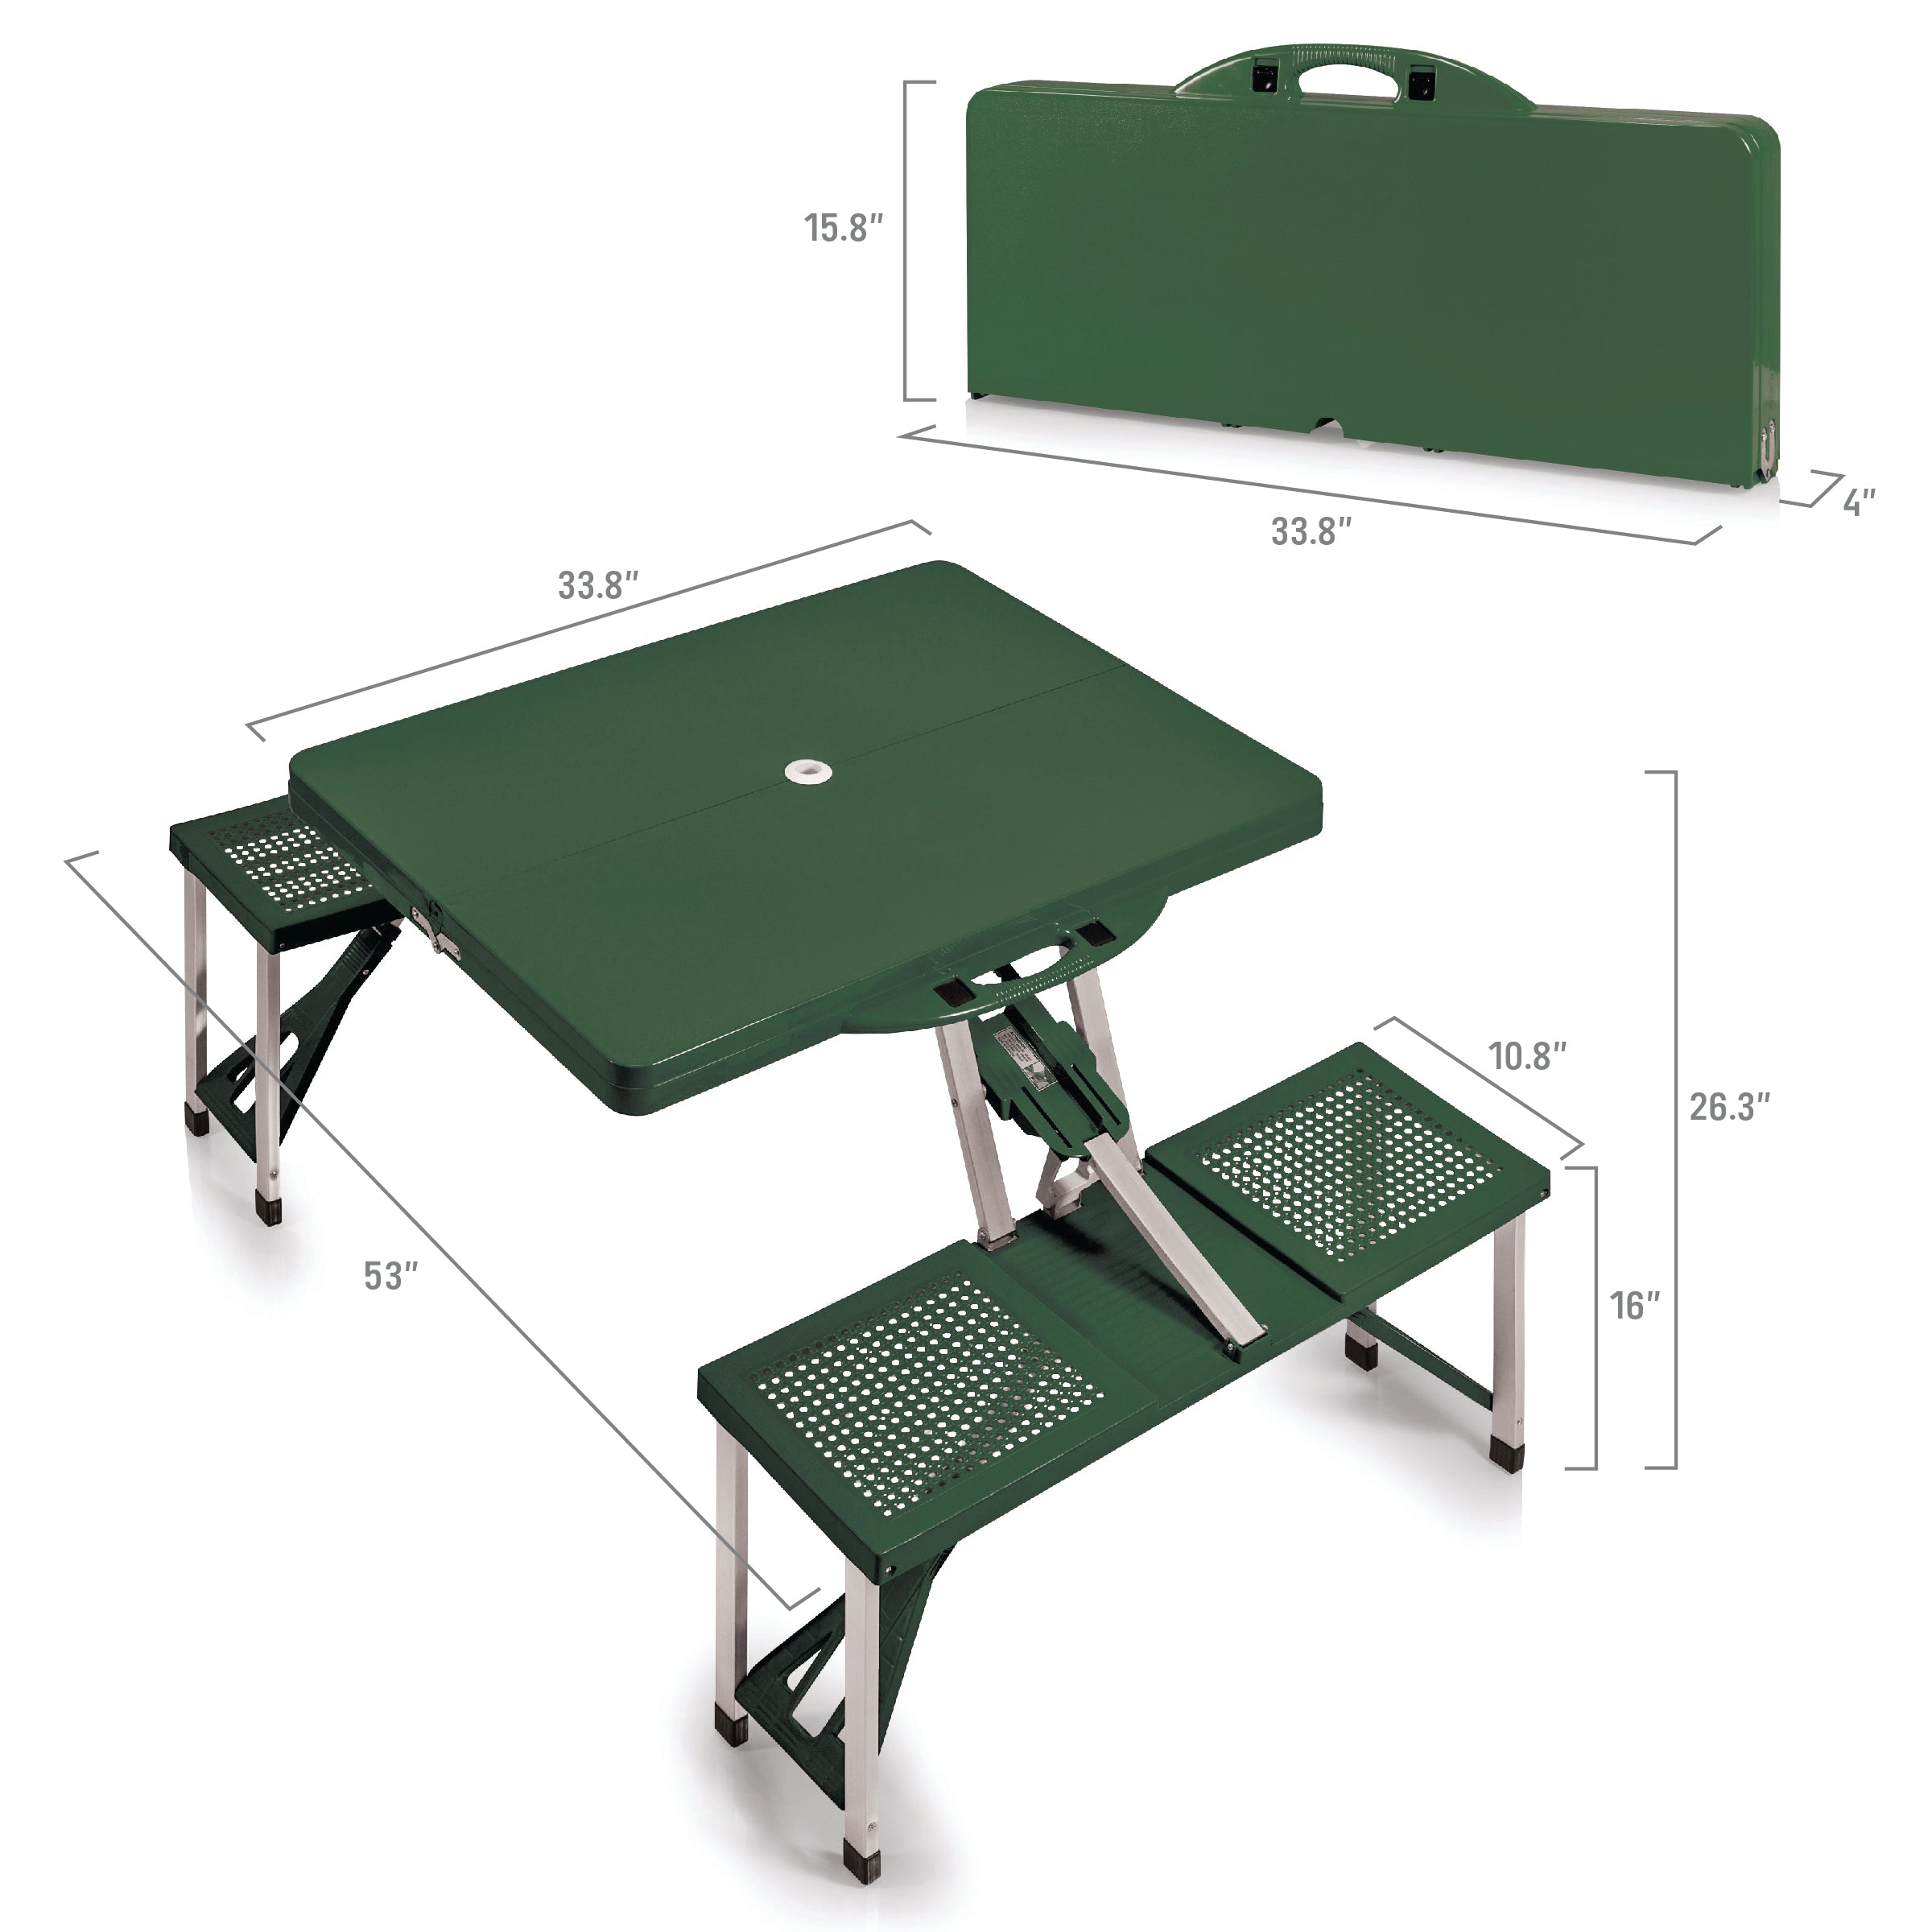 Colorado State Rams - Picnic Table Portable Folding Table with Seats